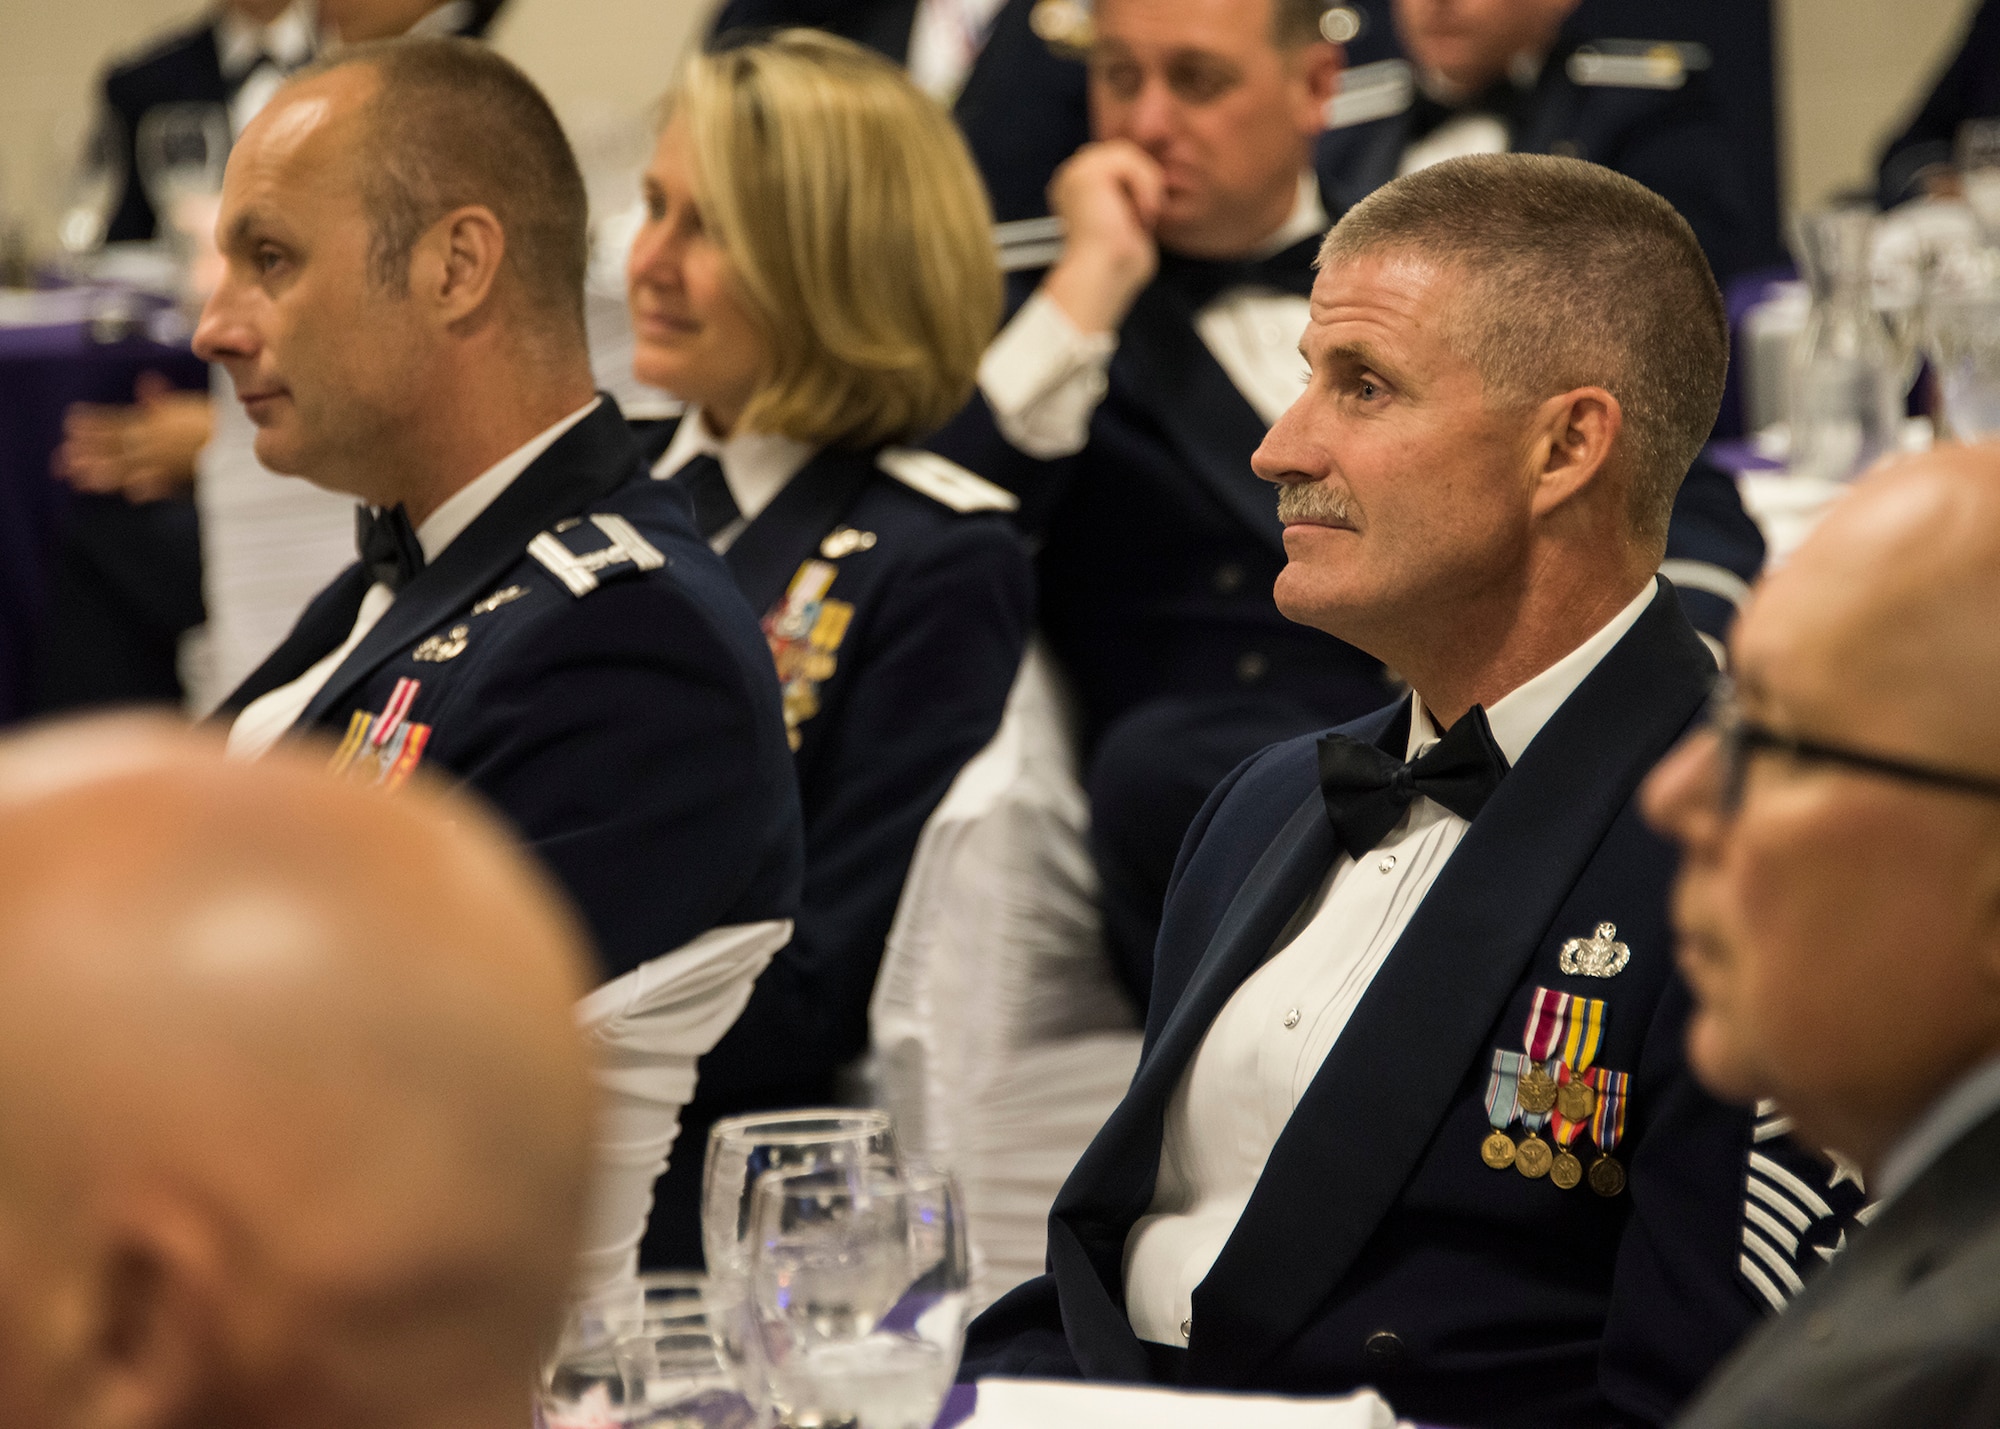 Dignitaries listen to guest speakers during the wing's inaugural Senior Non-commissioned Officer Induction Ceremony, held at Ebbing Air National Guard Base, Ark., June 2, 2018. The wing celebrated the accomplishments of its newest senior NCOs during the evening's event. (U.S. Air National Guard photo by Tech. Sgt. John E. Hillier)